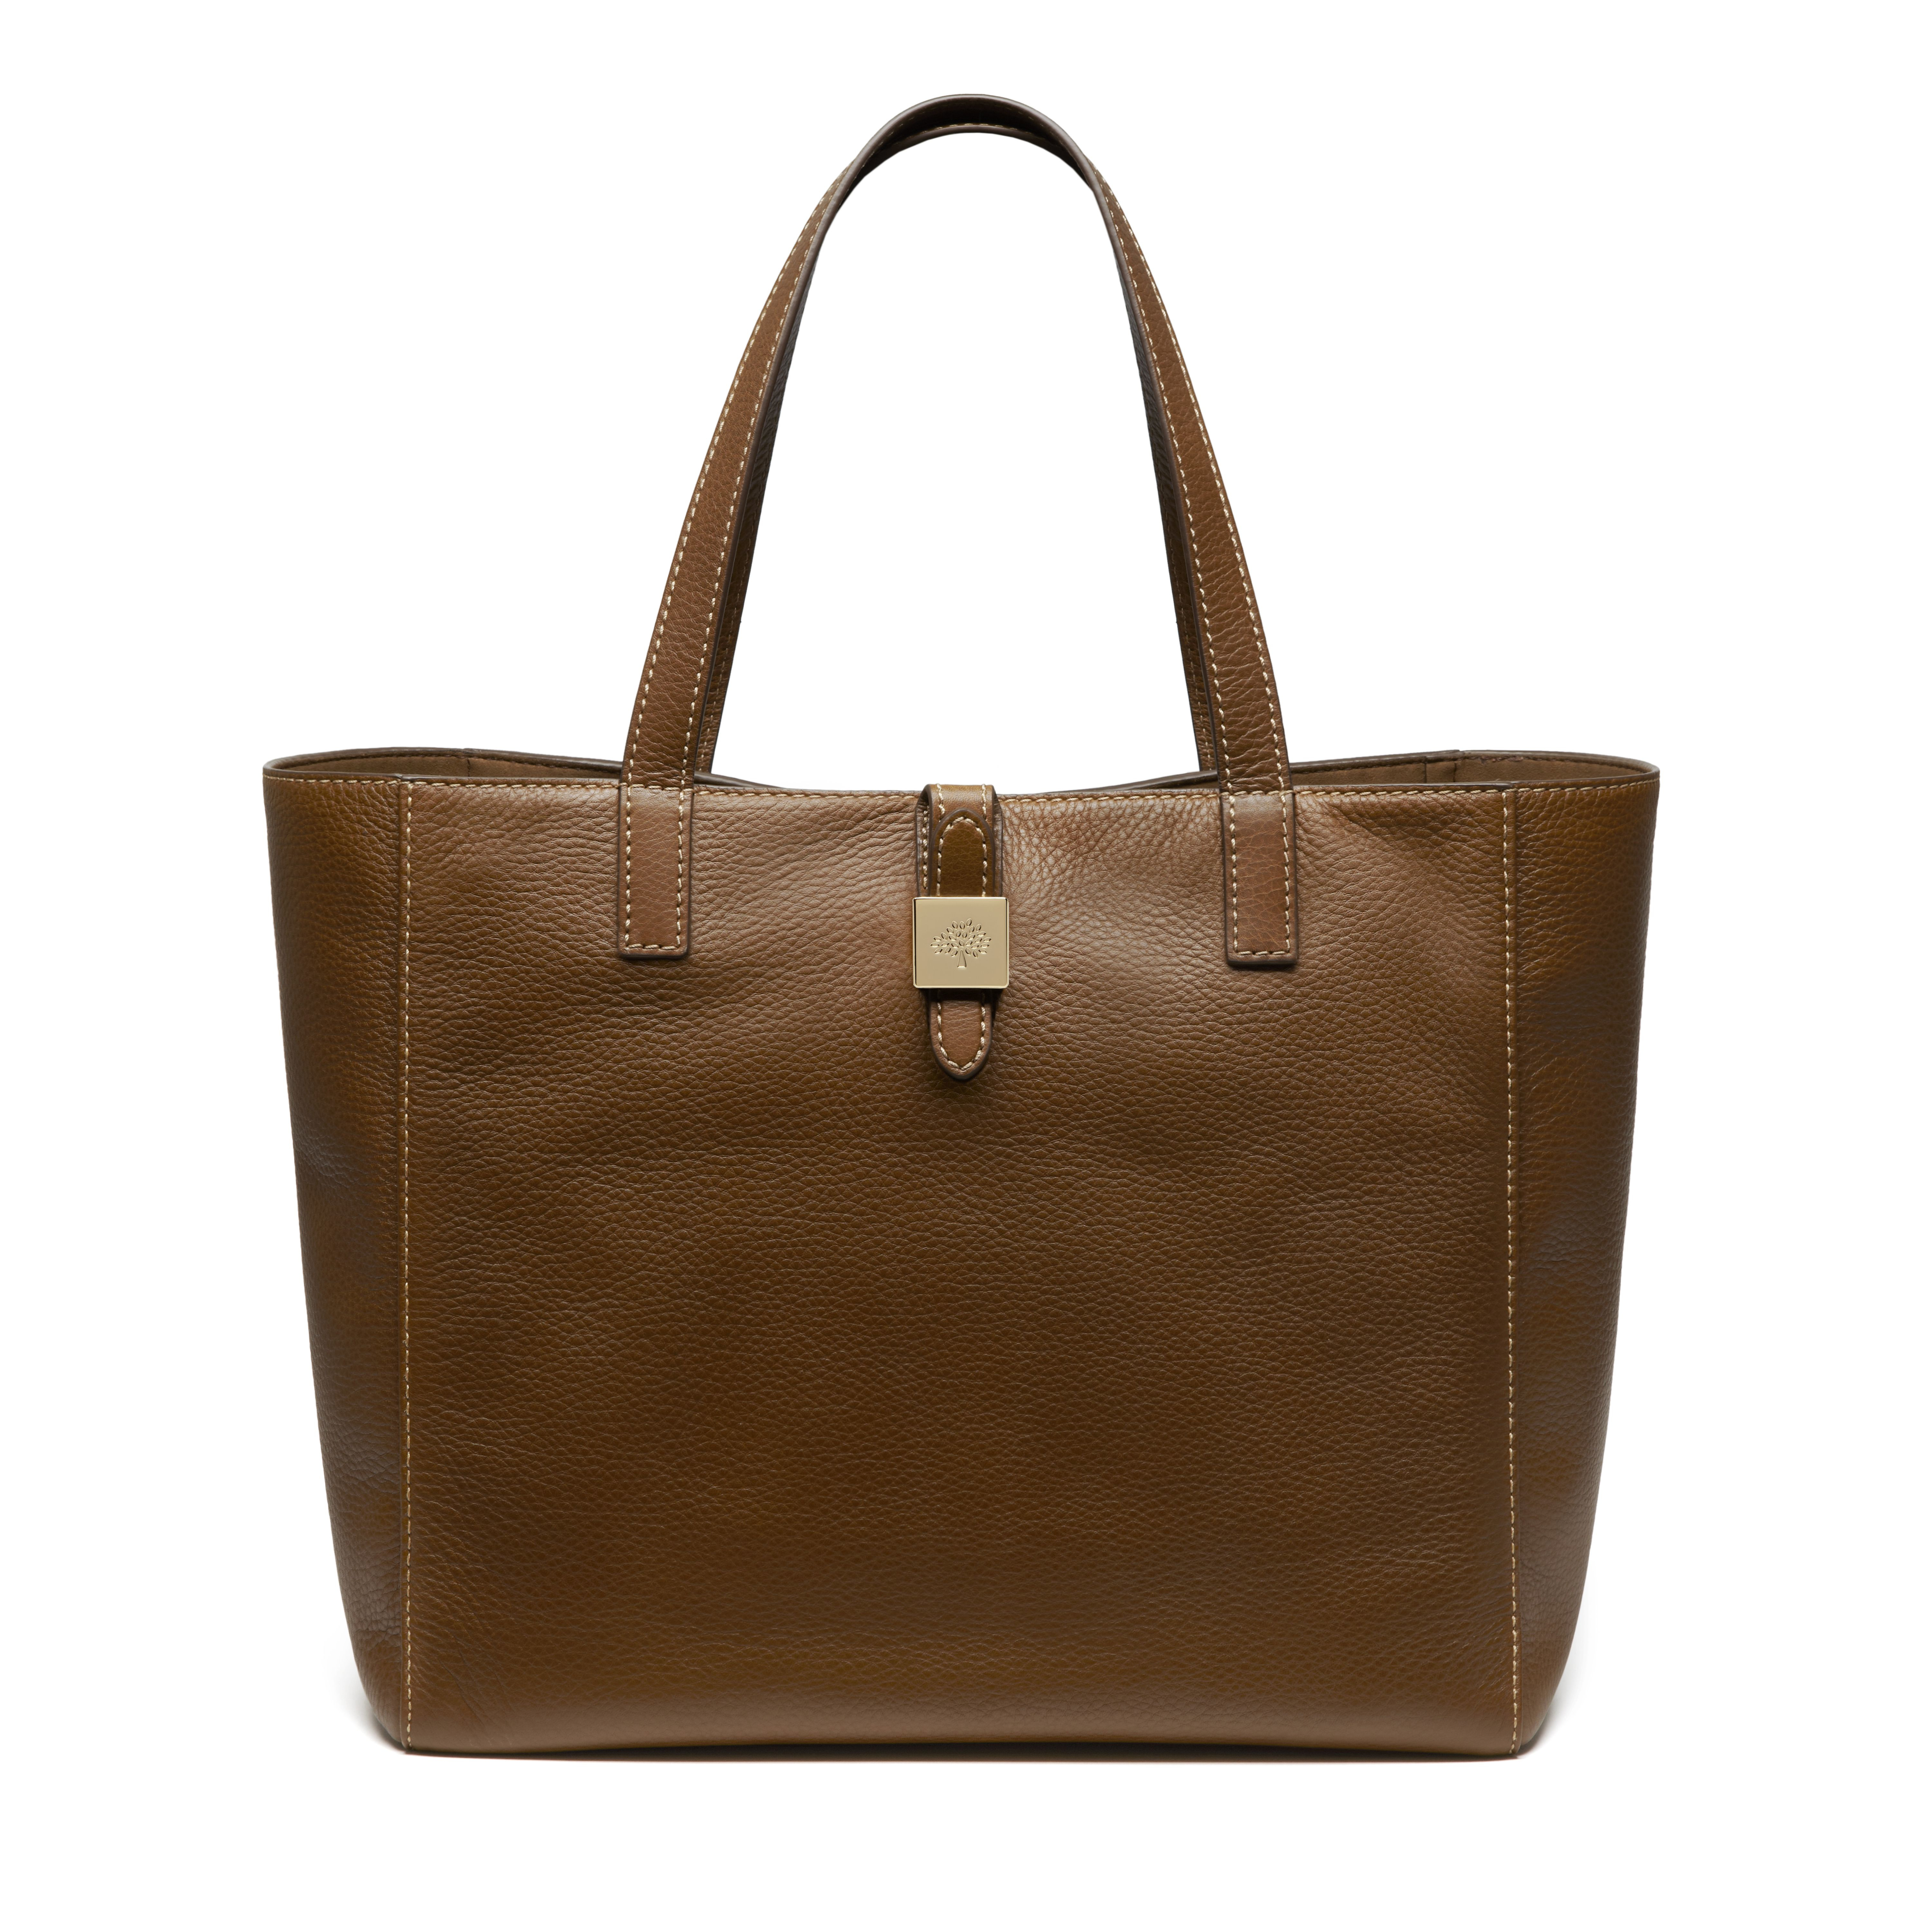 Mulberry Tessie Tote Bag in Brown - Lyst